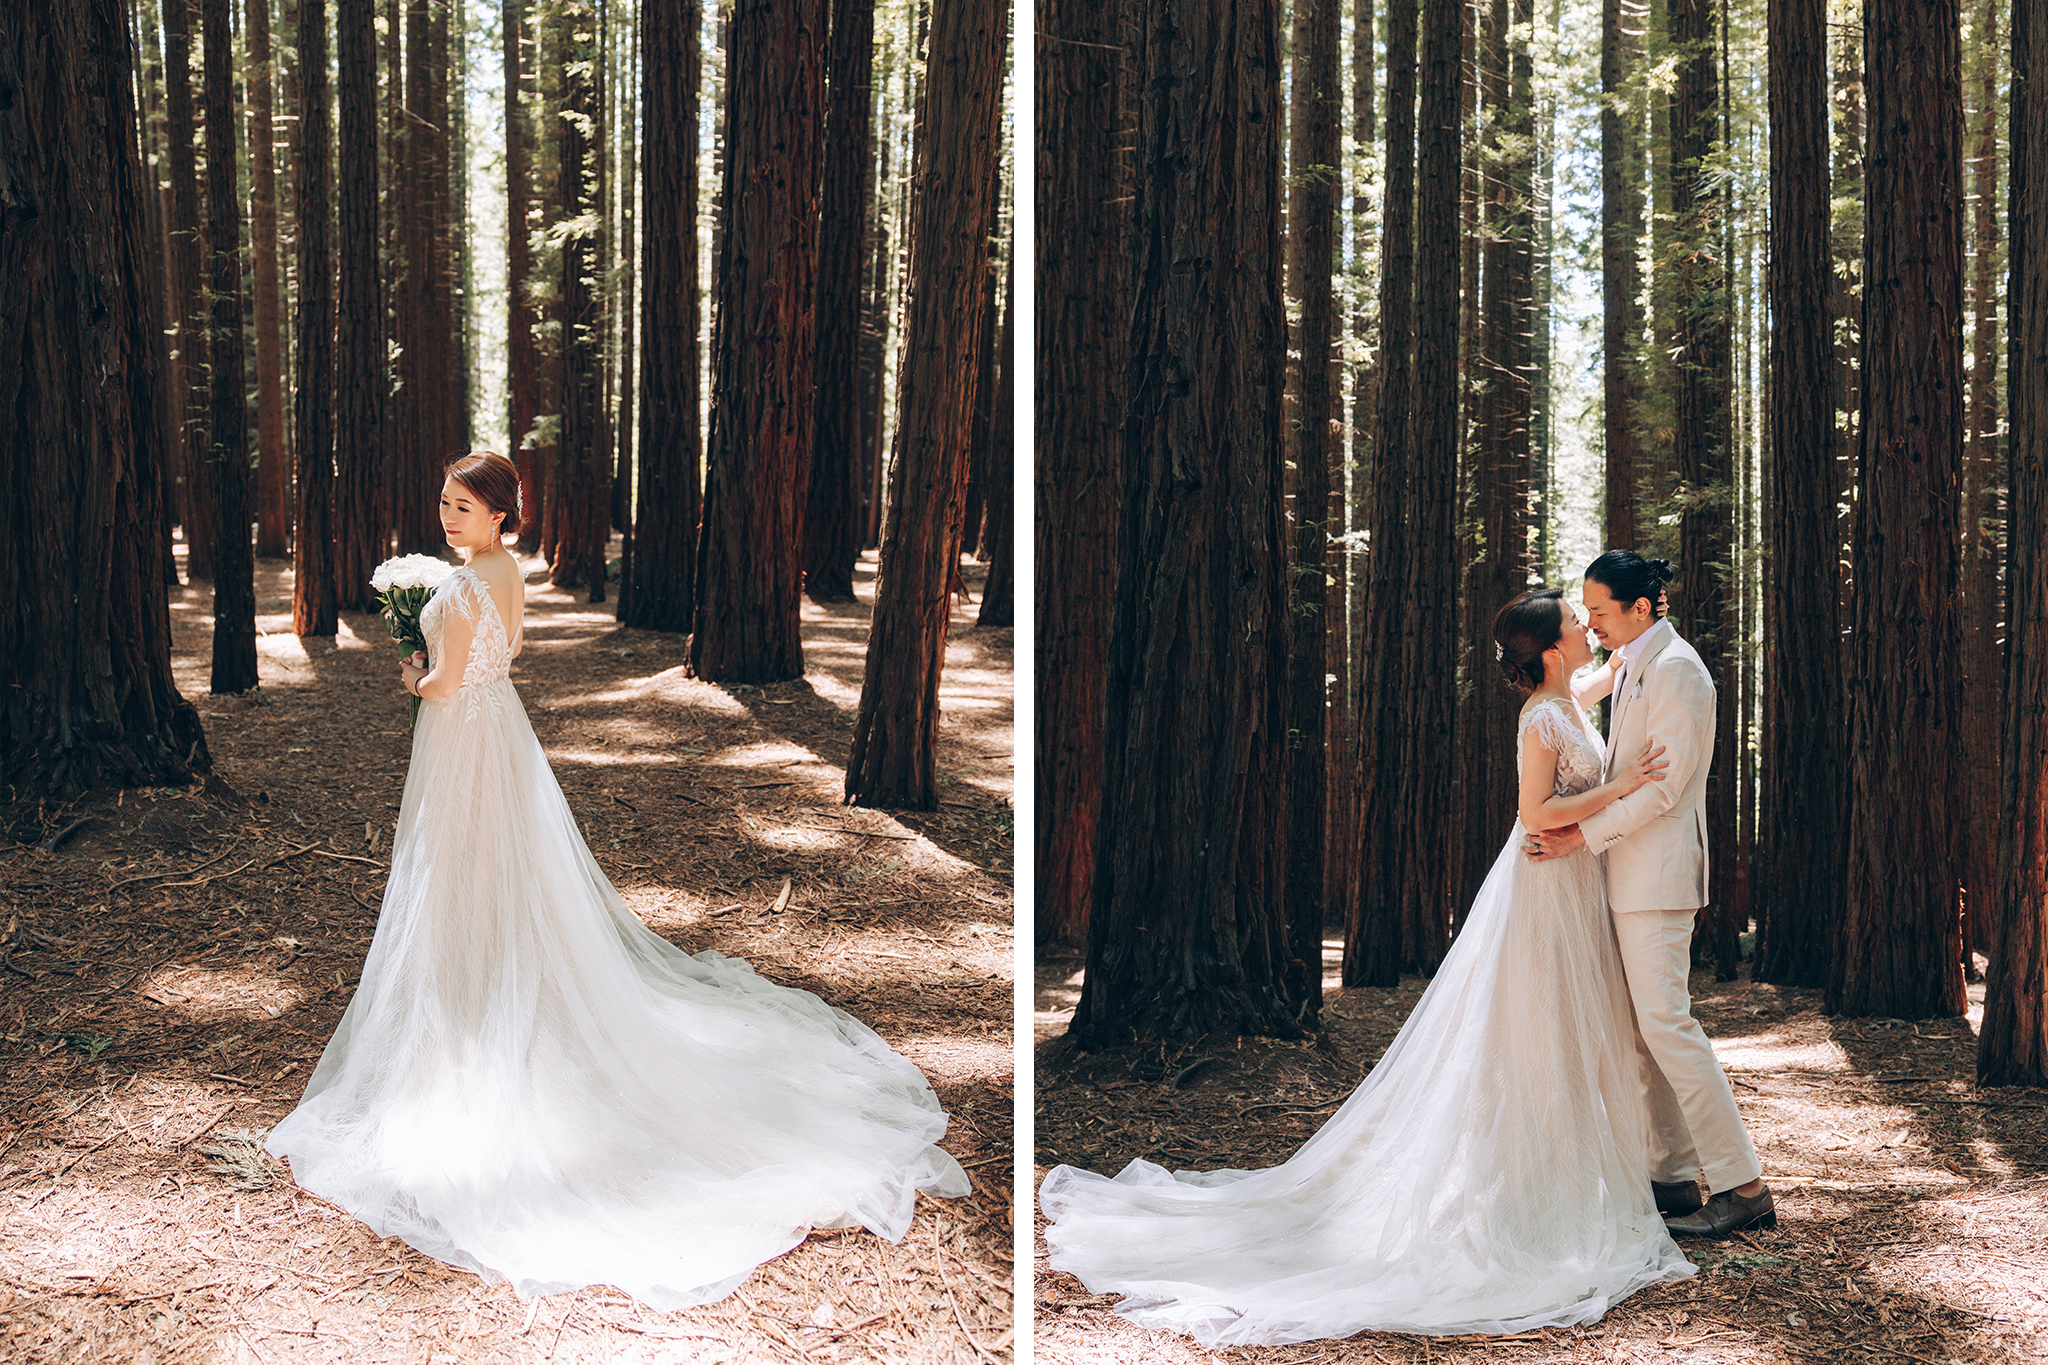 Melbourne Pre-Wedding Photoshoot in Redwood Forest by Freddy on OneThreeOneFour 4